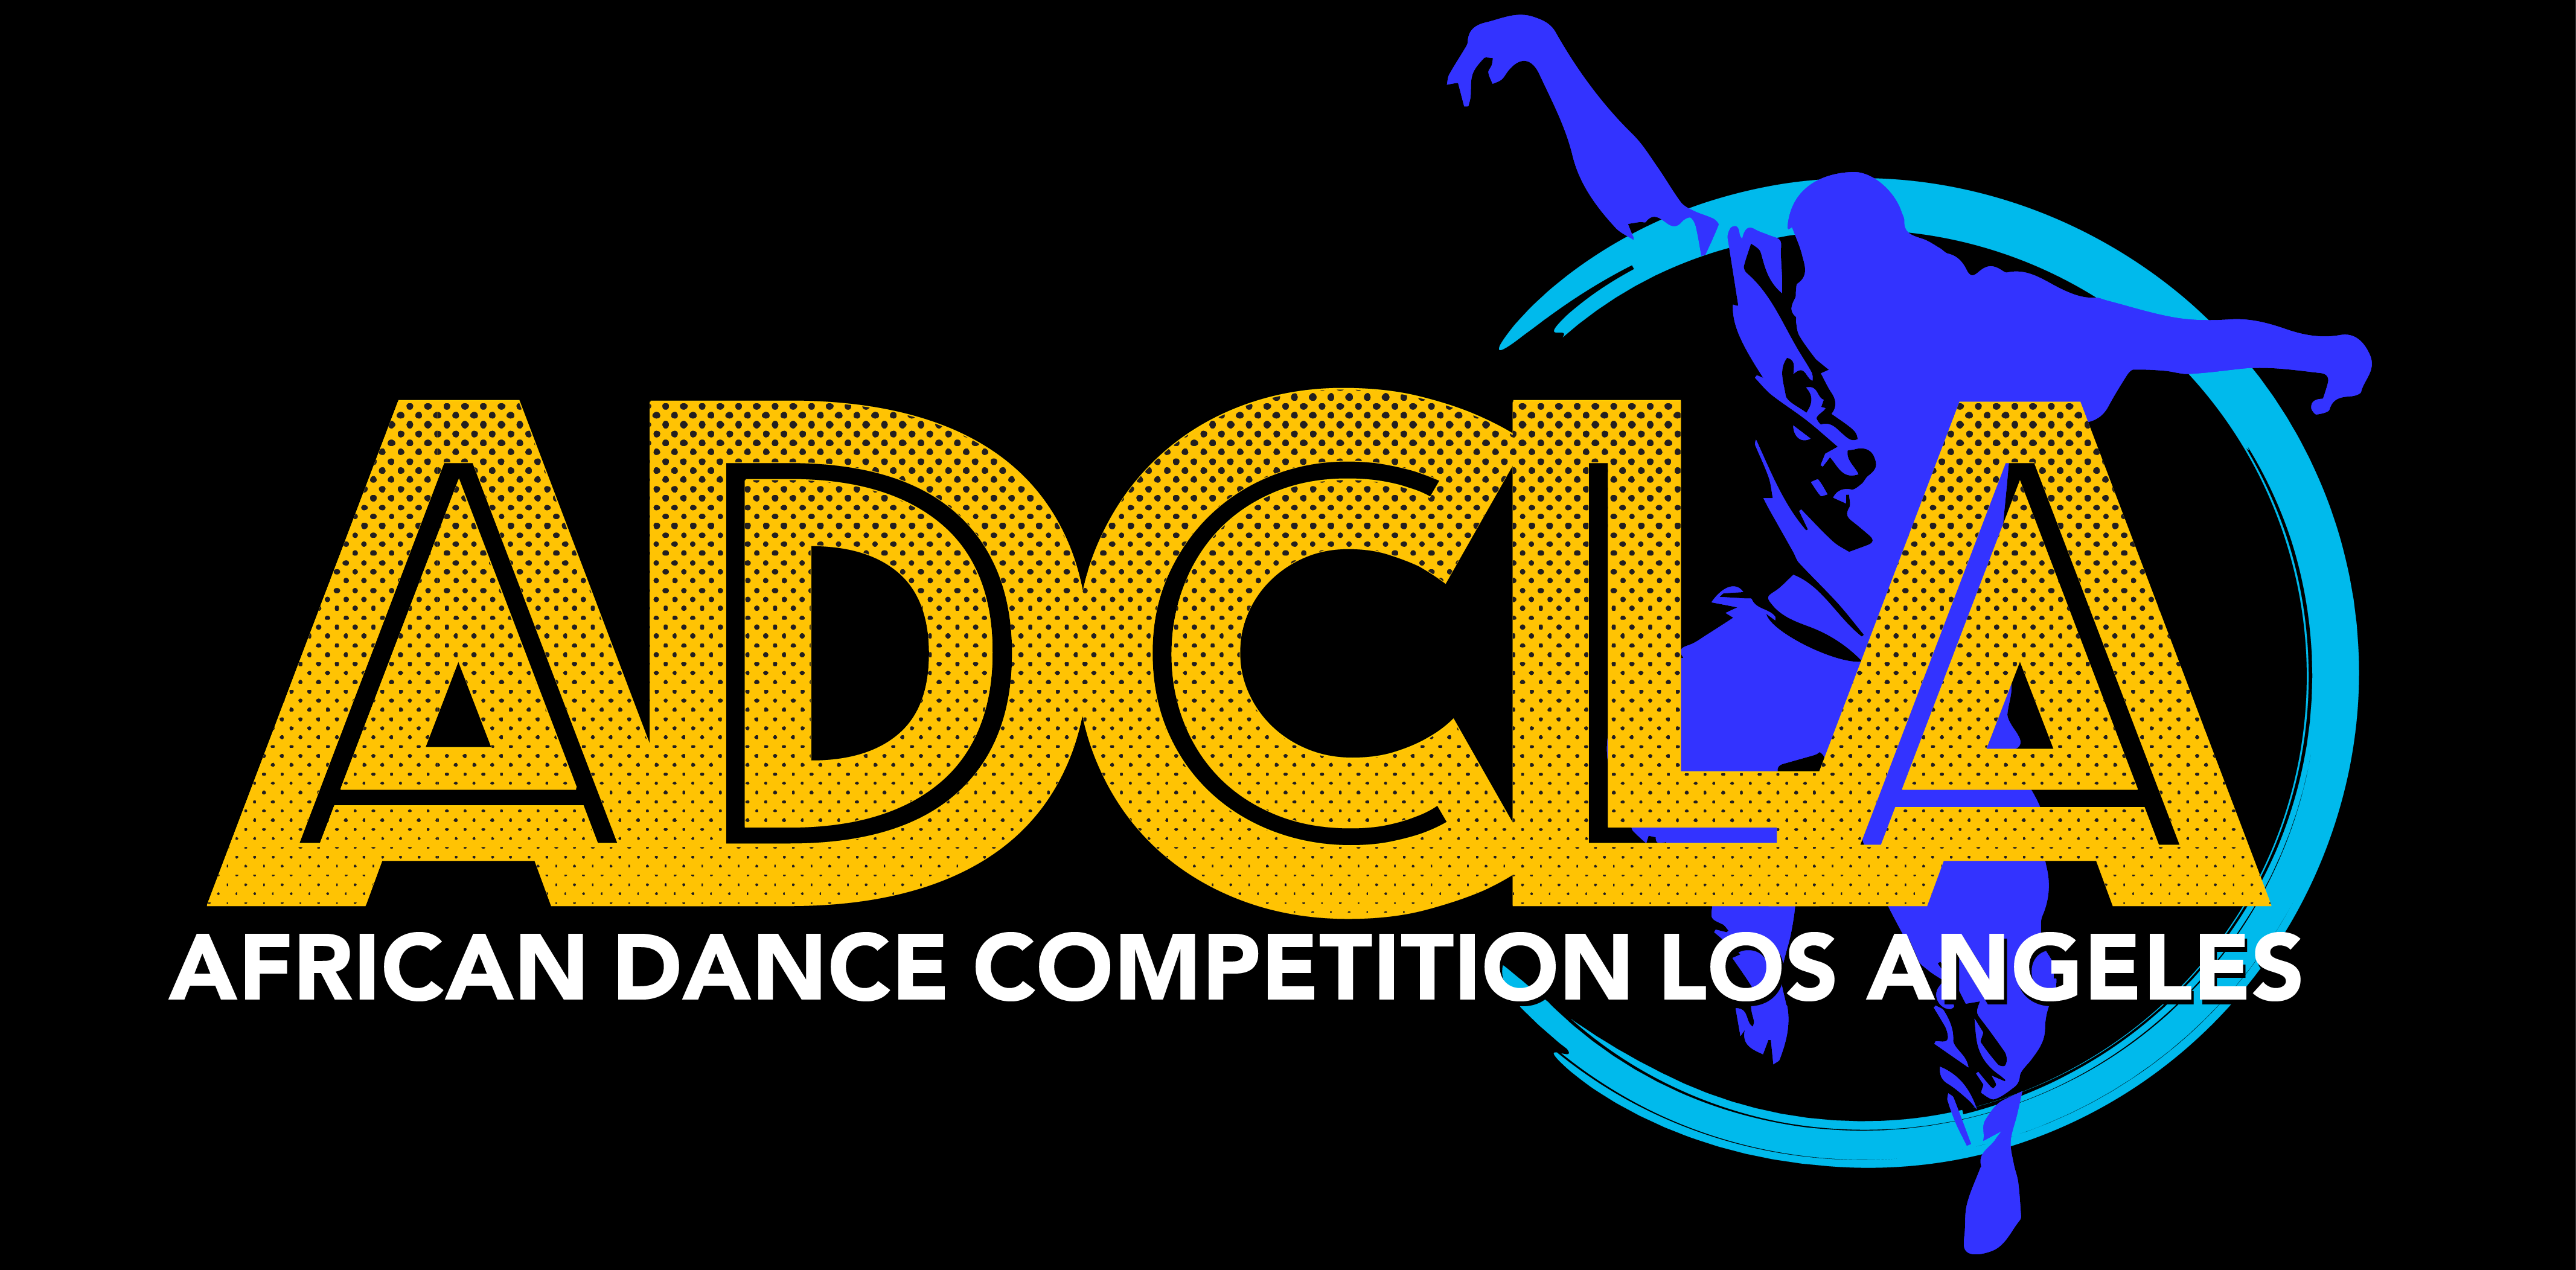 African Dance Competition Los Angeles 2020